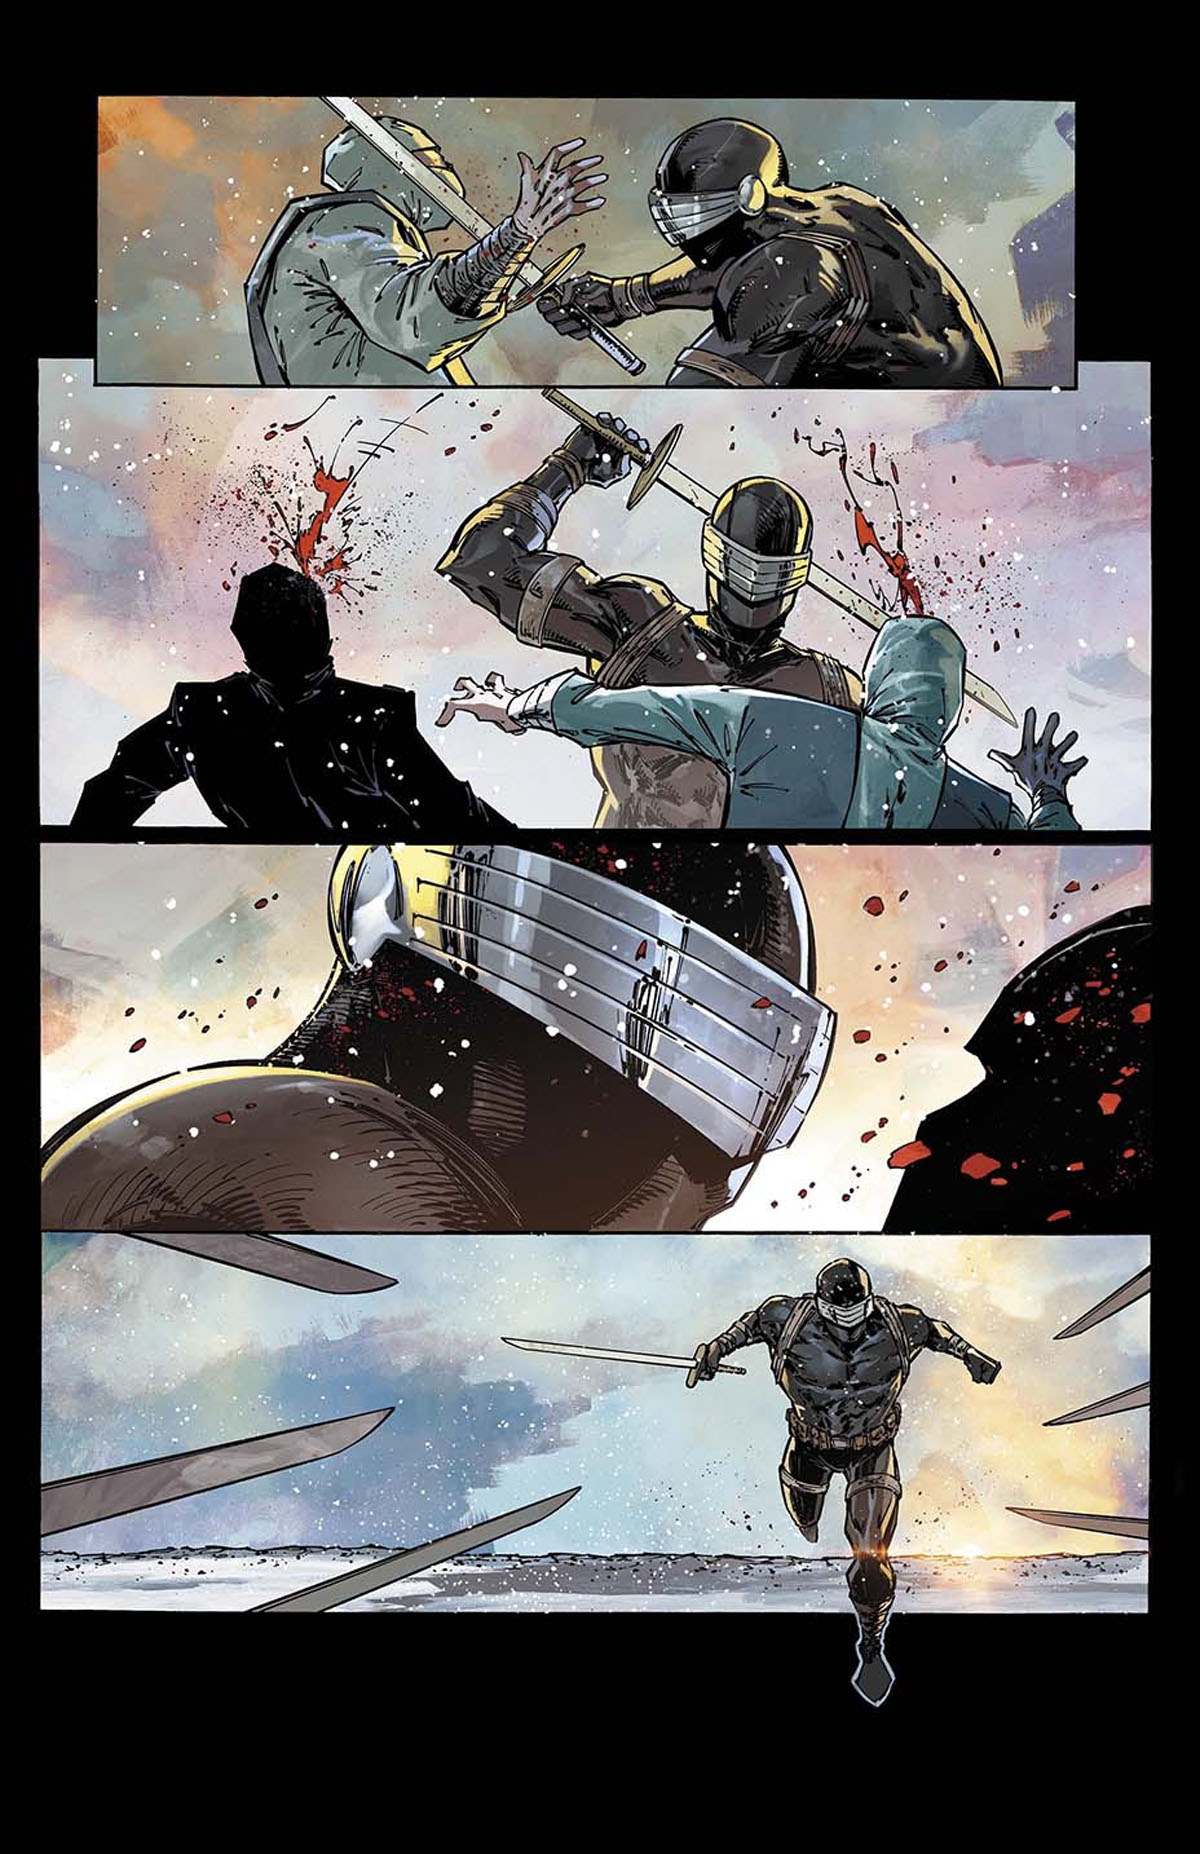 Snake Eyes: Deadgame #1 preview page 1